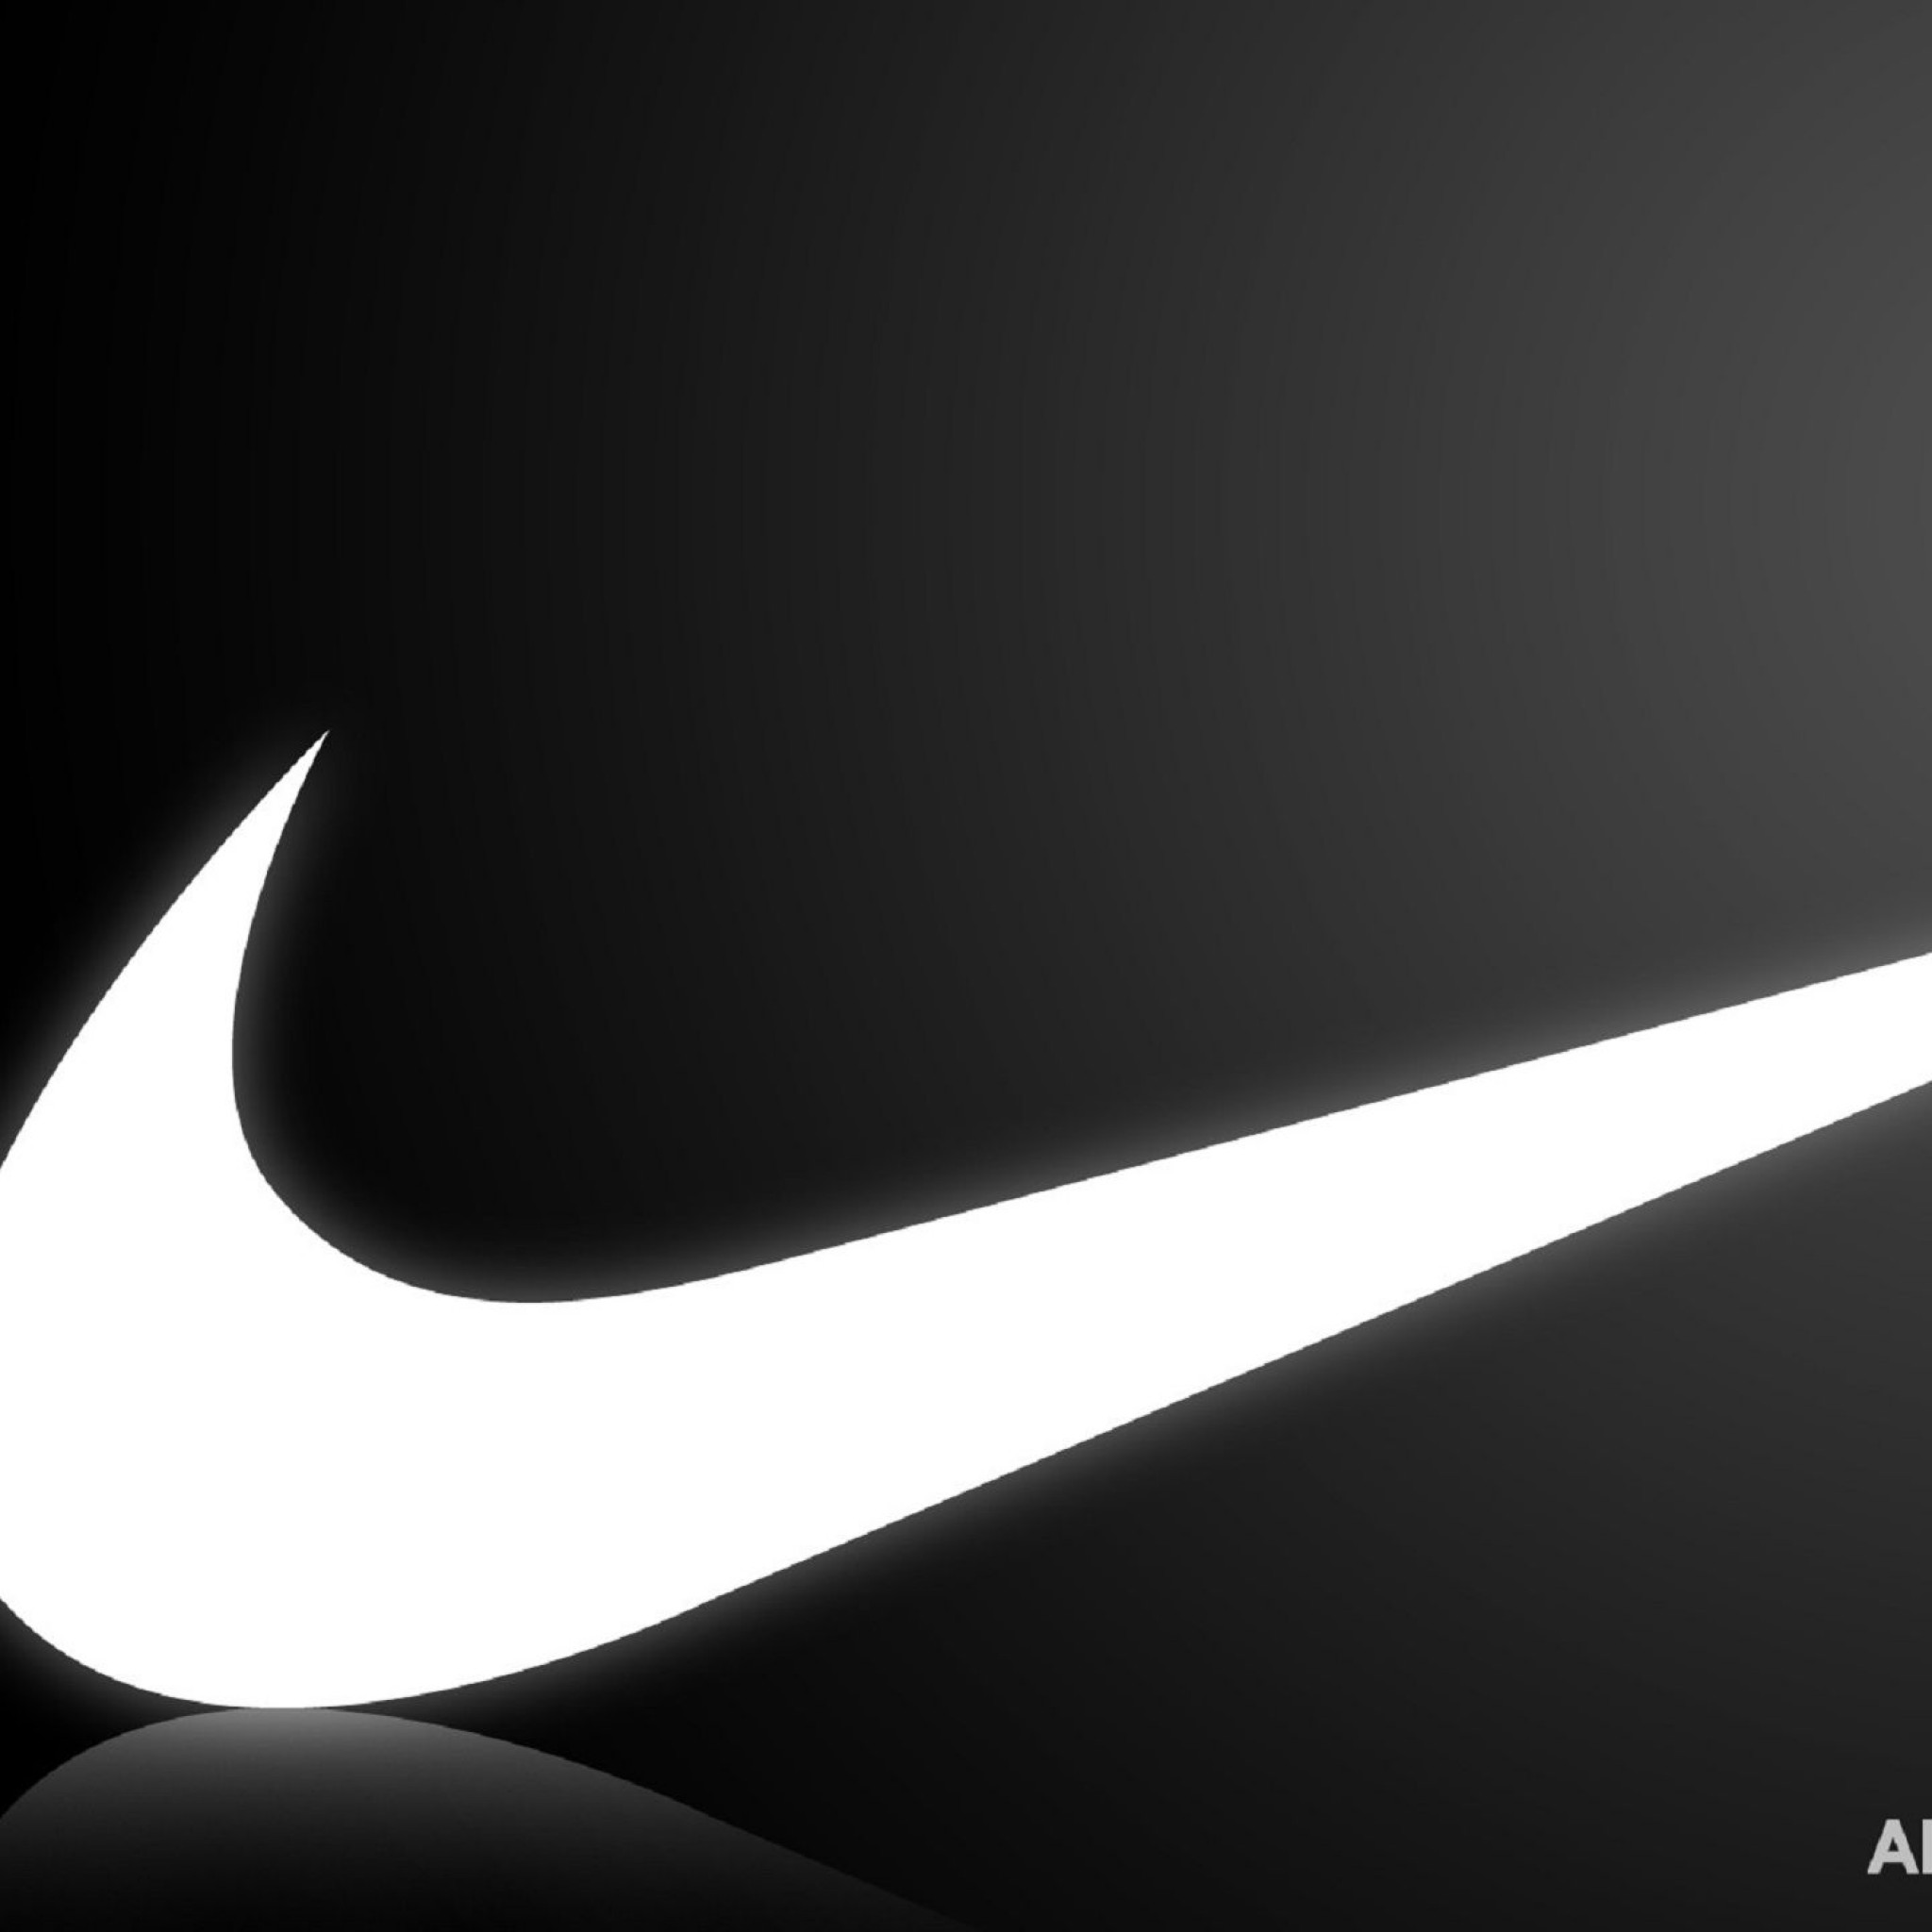 Free Download Nike Iphone Wallpapers Ipad Wallpaper Gallery 48x48 For Your Desktop Mobile Tablet Explore 50 Nike Wallpaper Iphone White Nike Wallpaper Nike Money Wallpaper Nike Flower Wallpaper